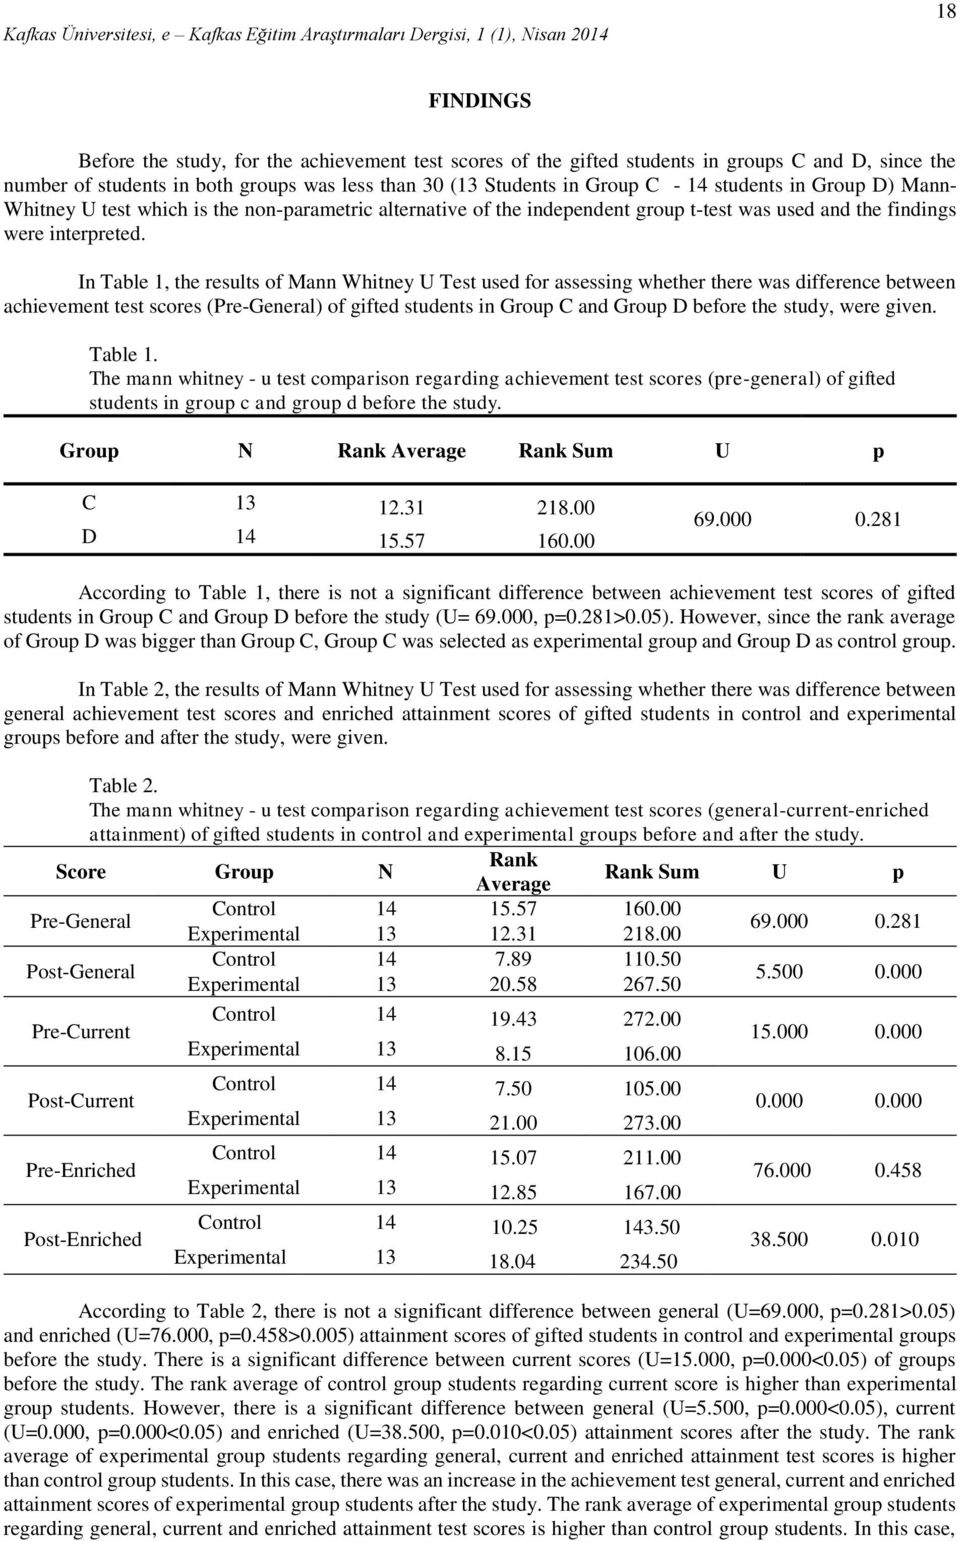 In Table 1, the results of Mann Whitney U Test used for assessing whether there was difference between achievement test scores (Pre-General) of gifted students in Group C and Group D before the